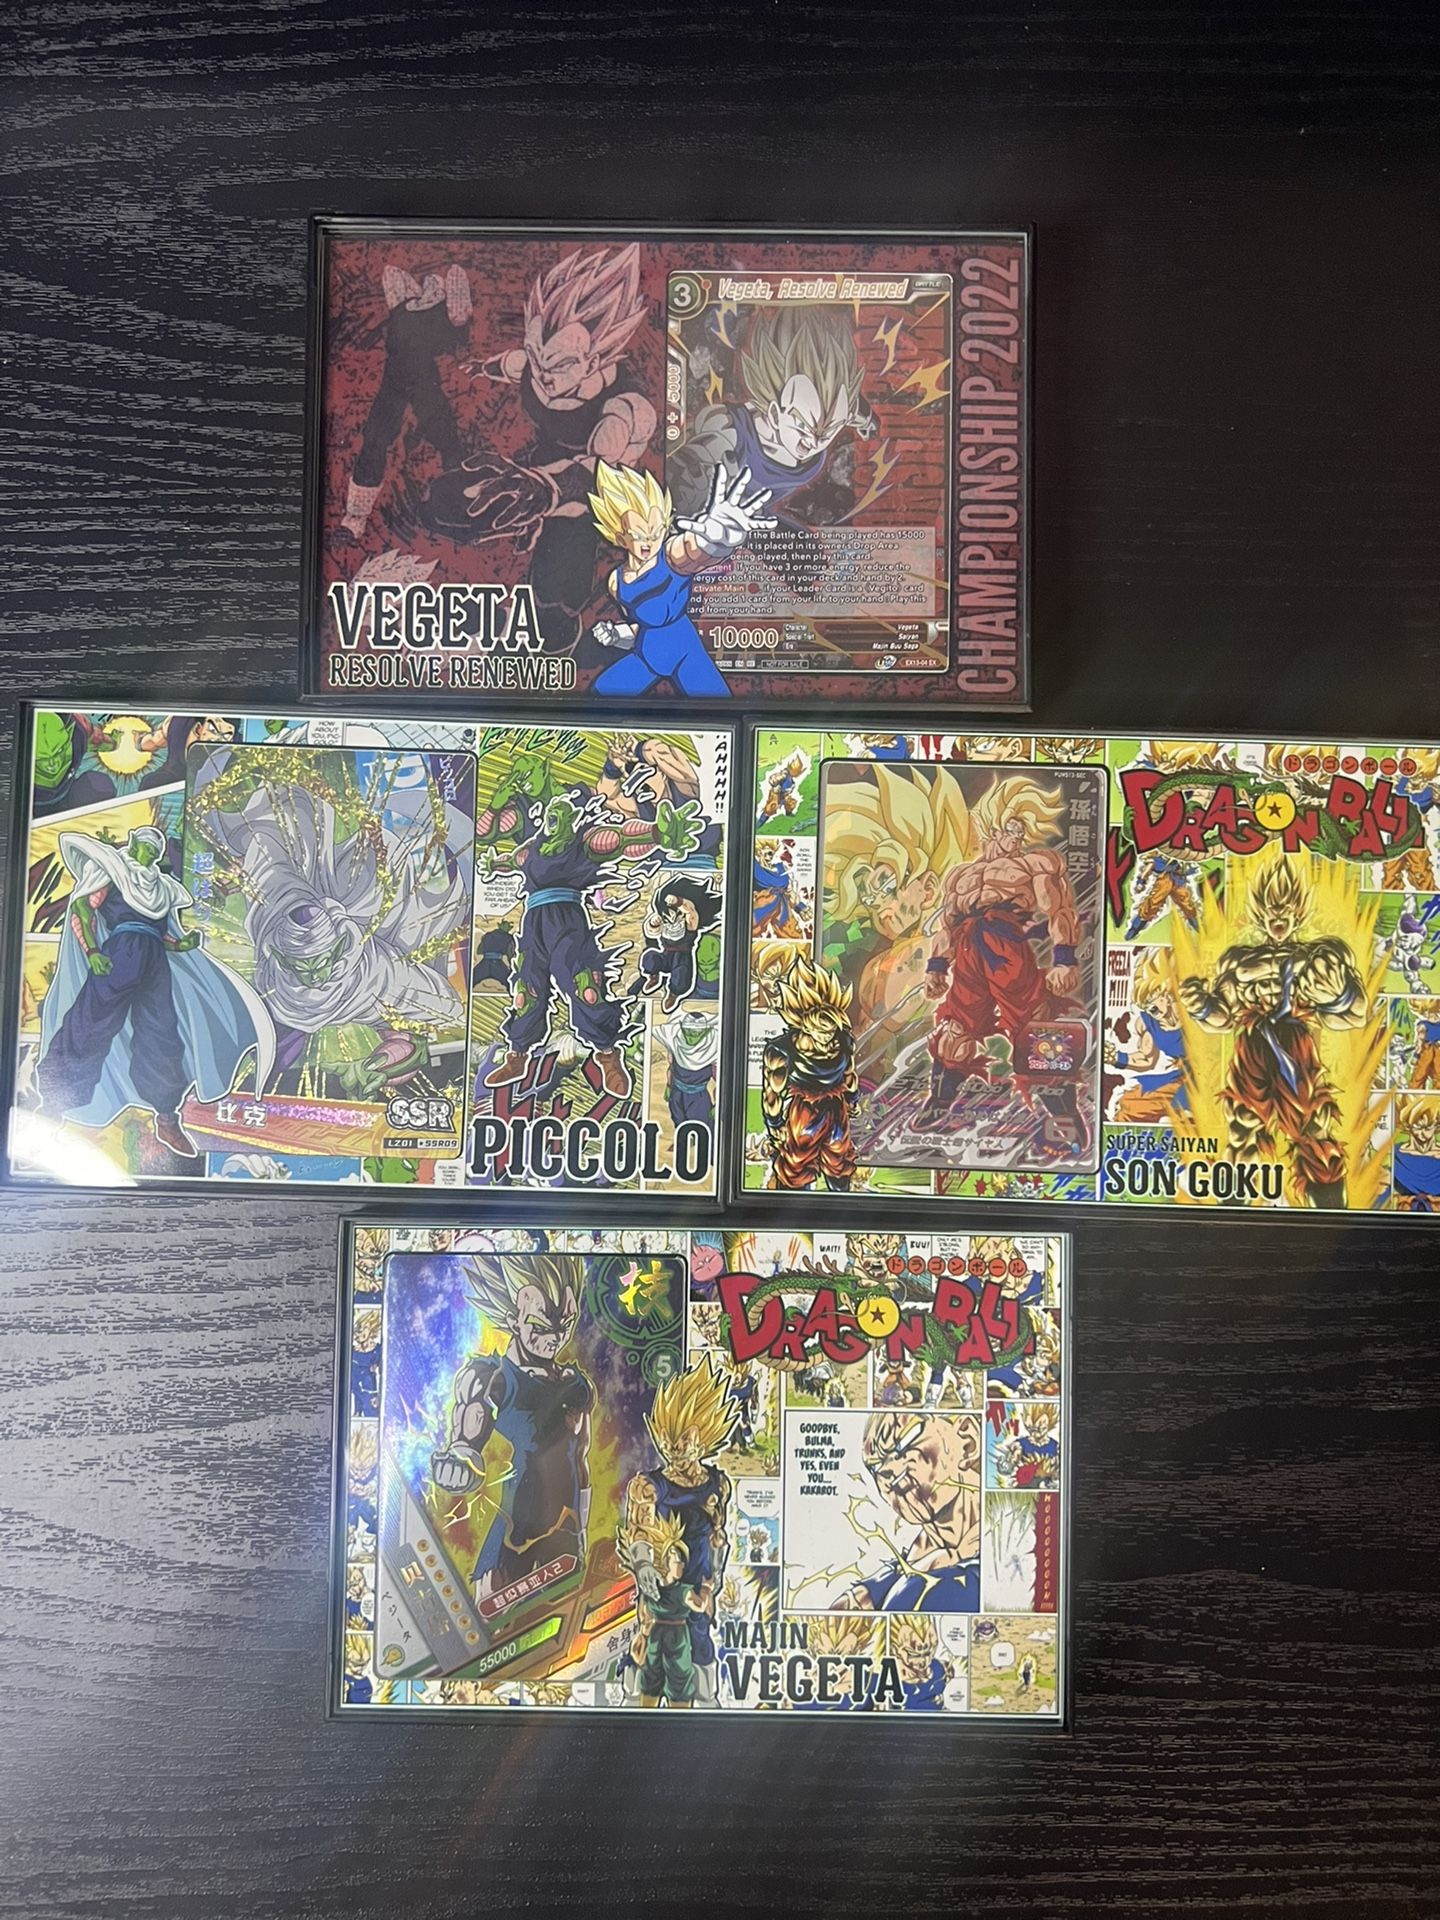 DragonBall Z Card Frames With Card Included